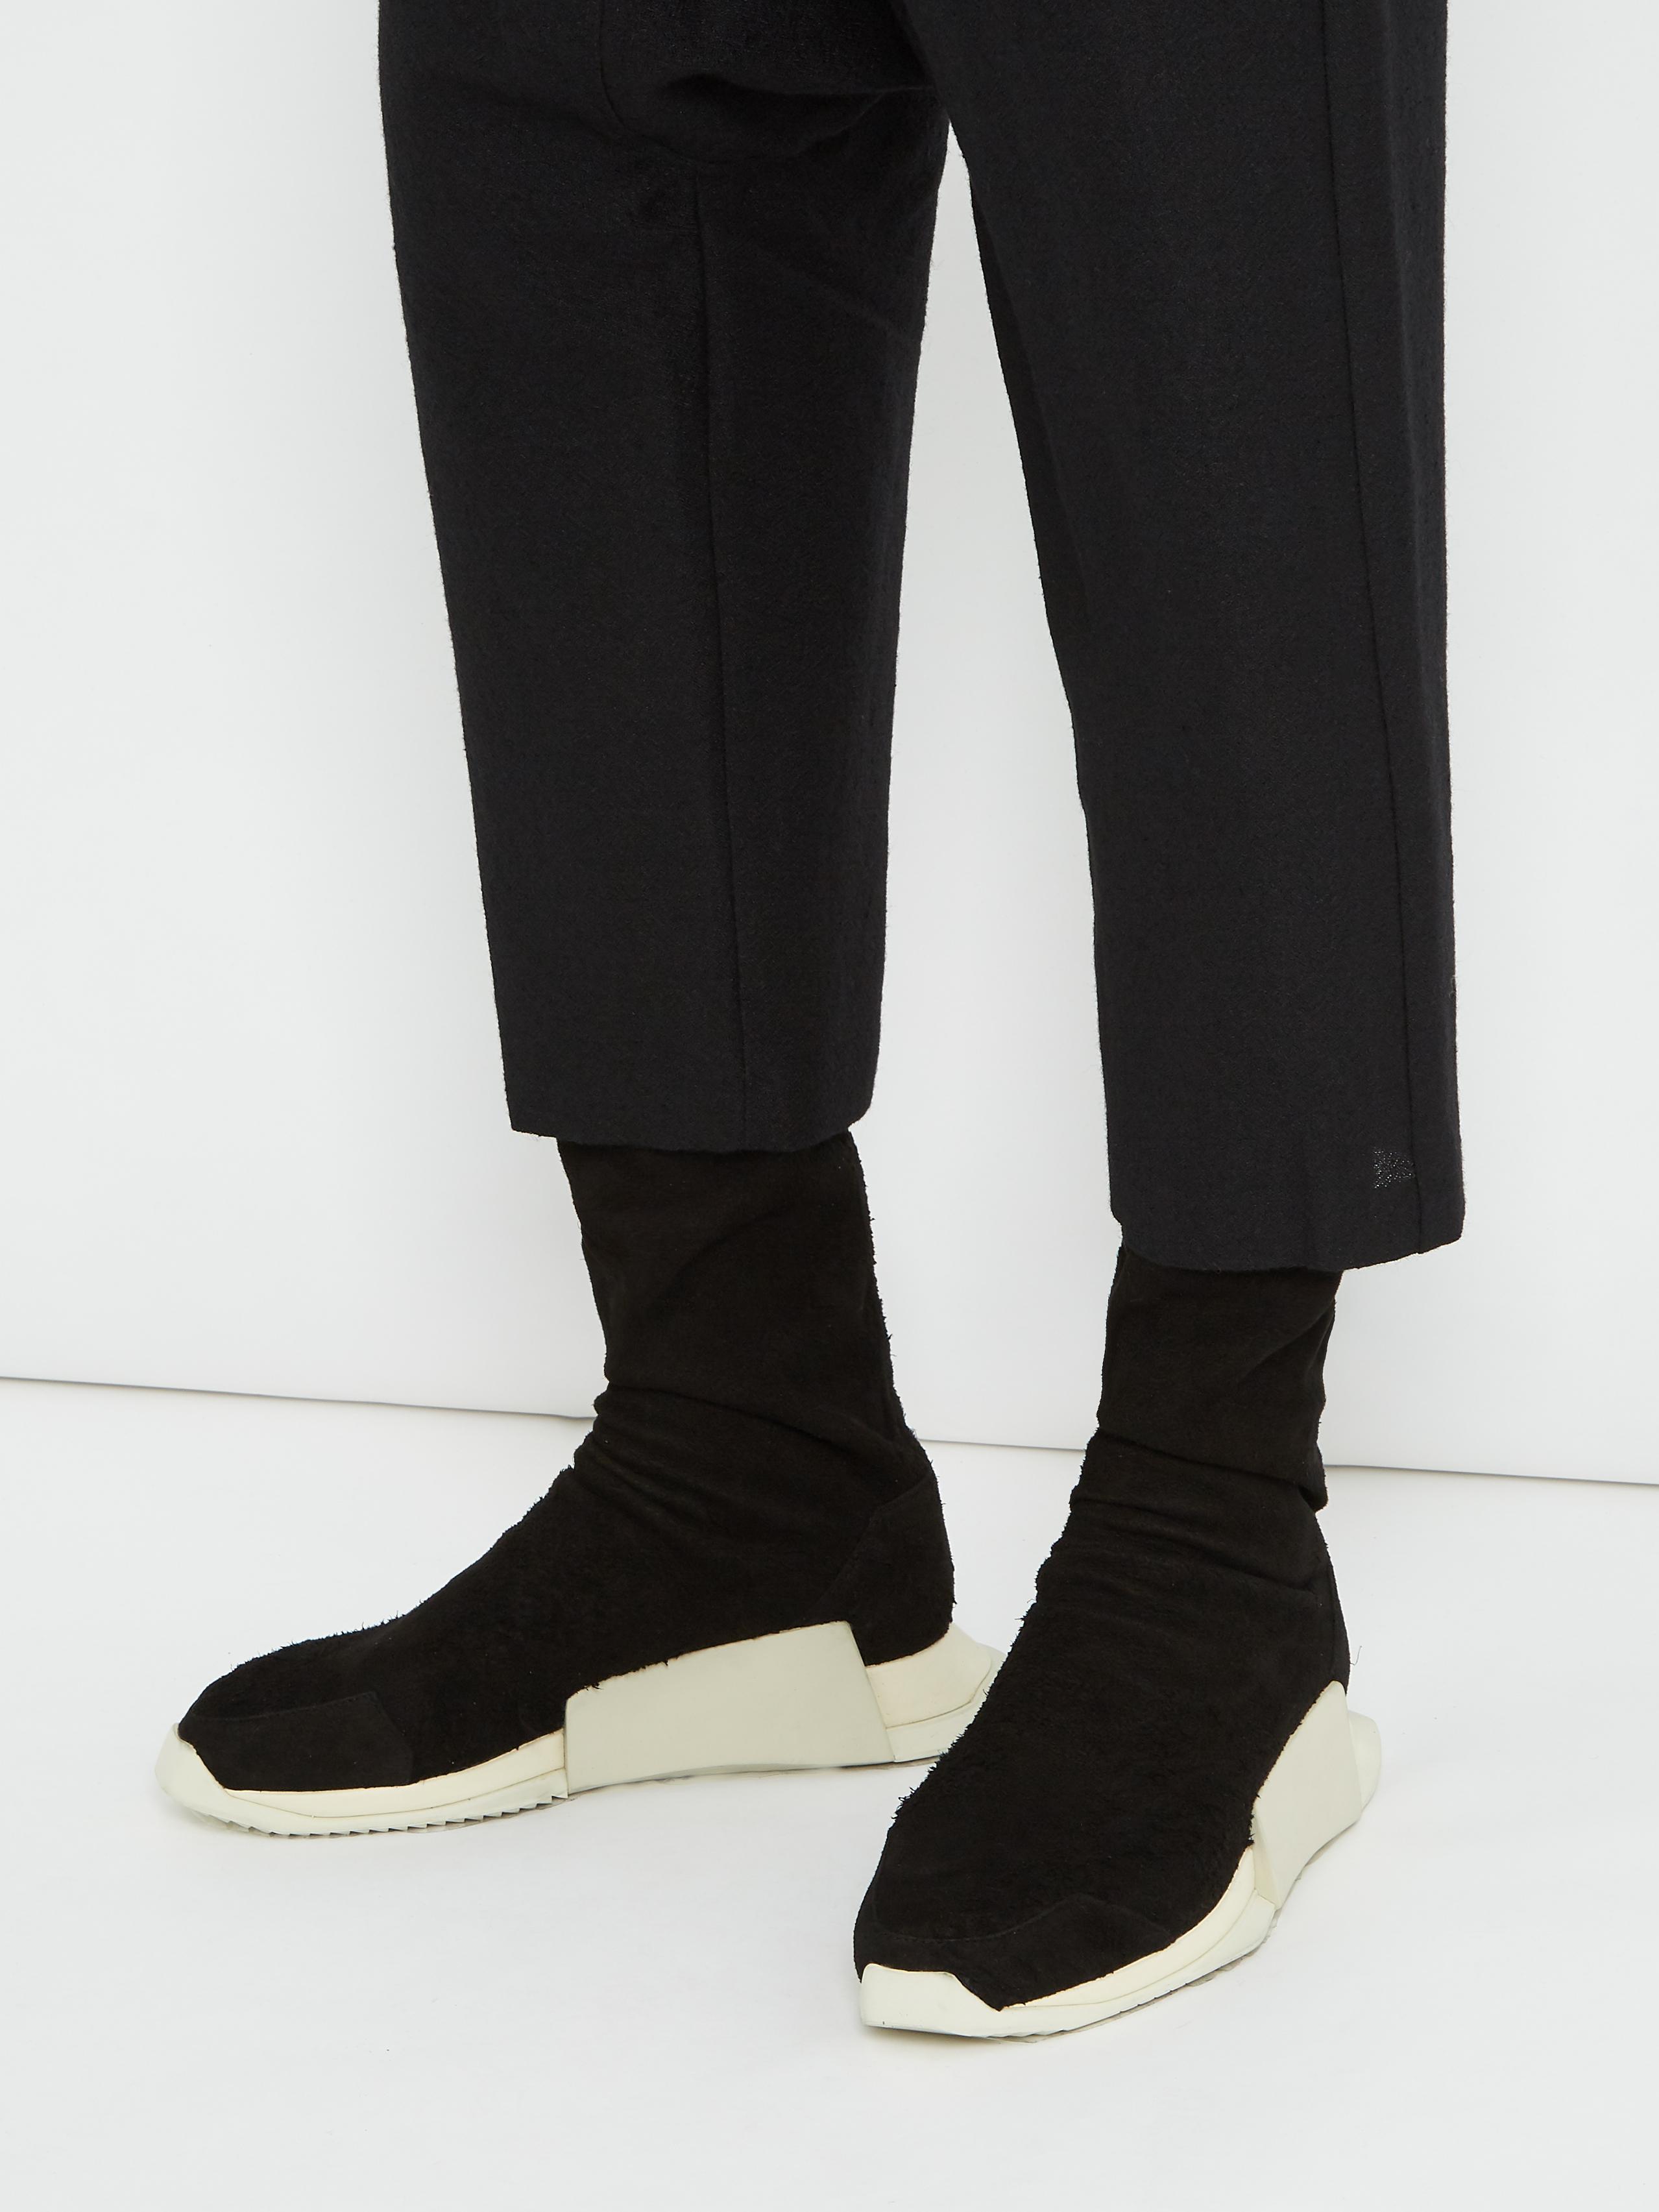 Rick Owens X Adidas Level Sock Suede Trainers in Black for Men - Lyst